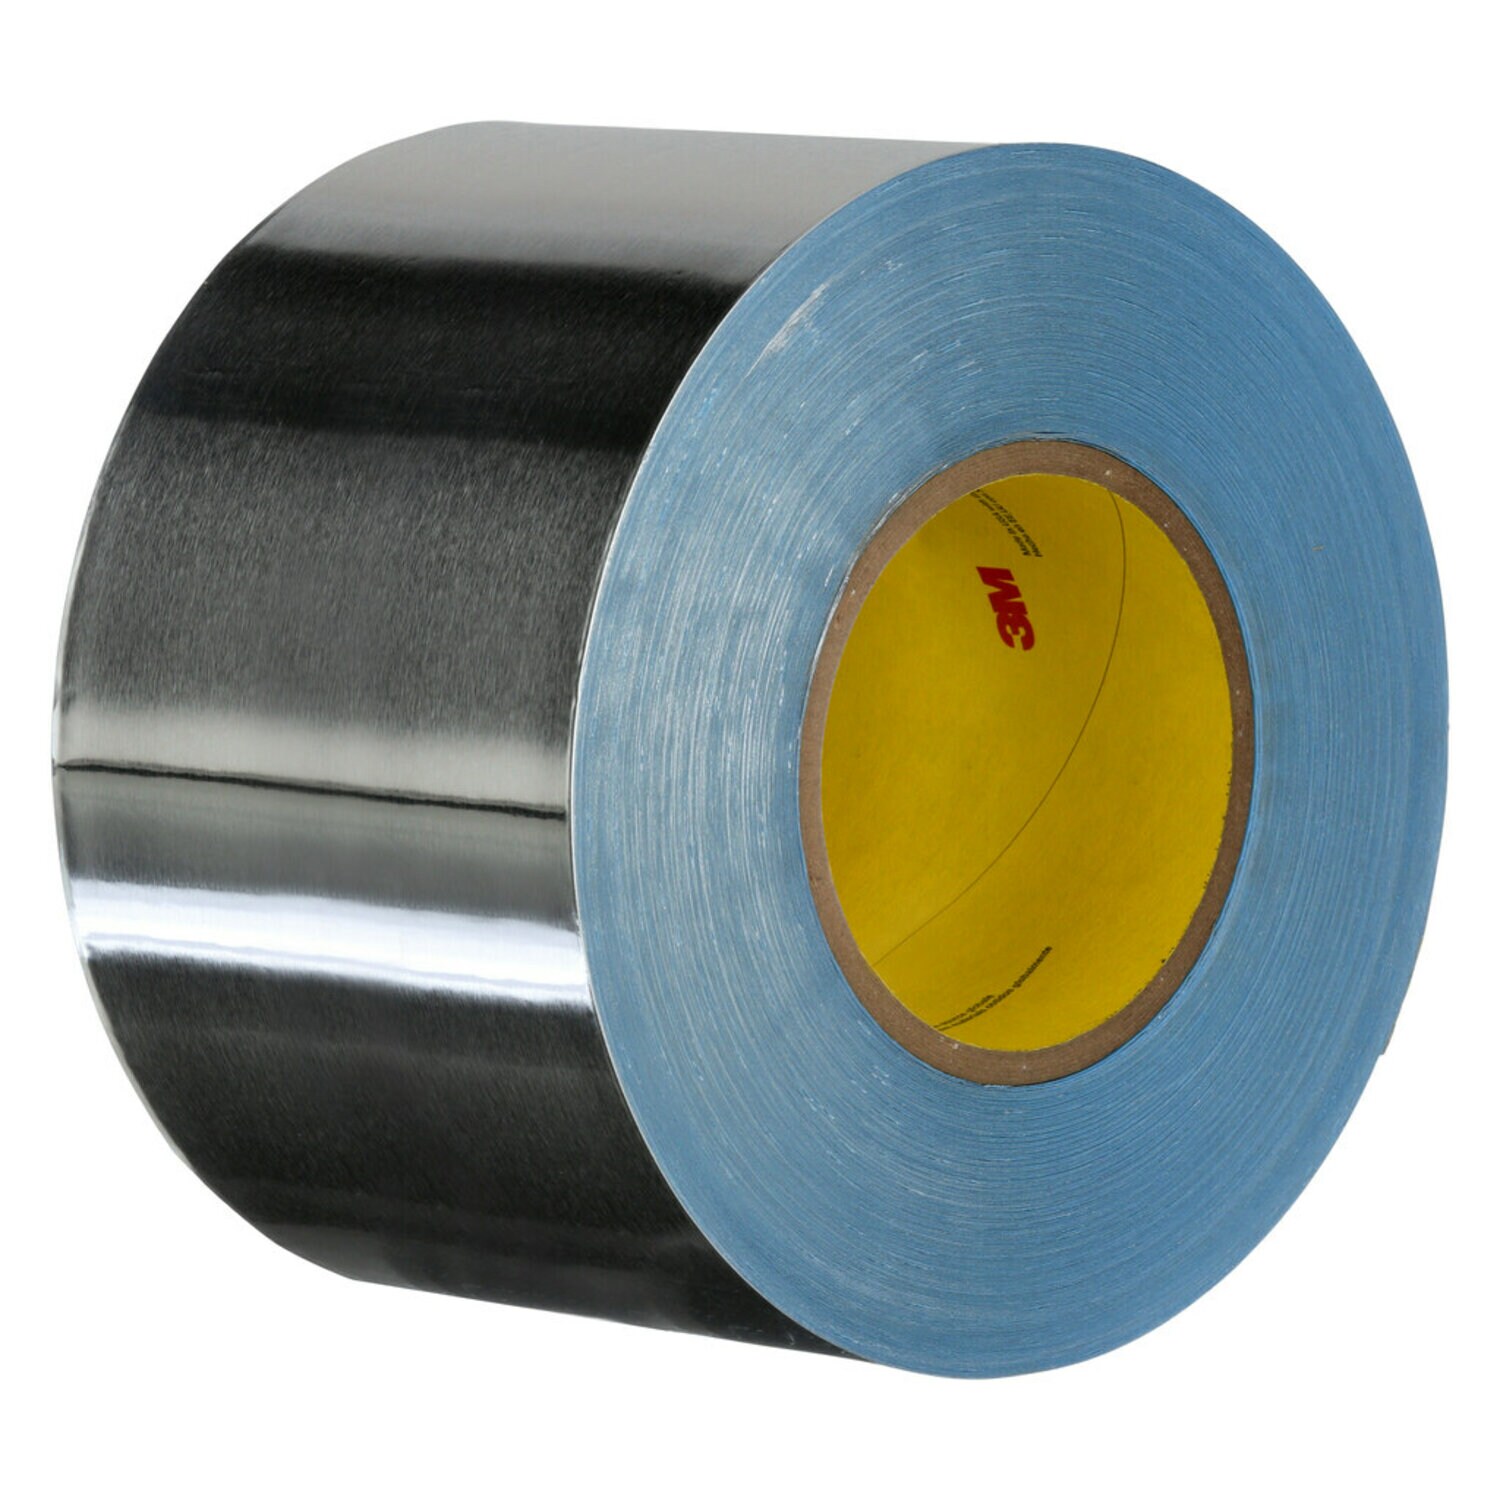 7000049096 - 3M Vibration Damping Tape 434, Silver, 3 in x 60 yd, 7.5 mil, 3 rolls
per case